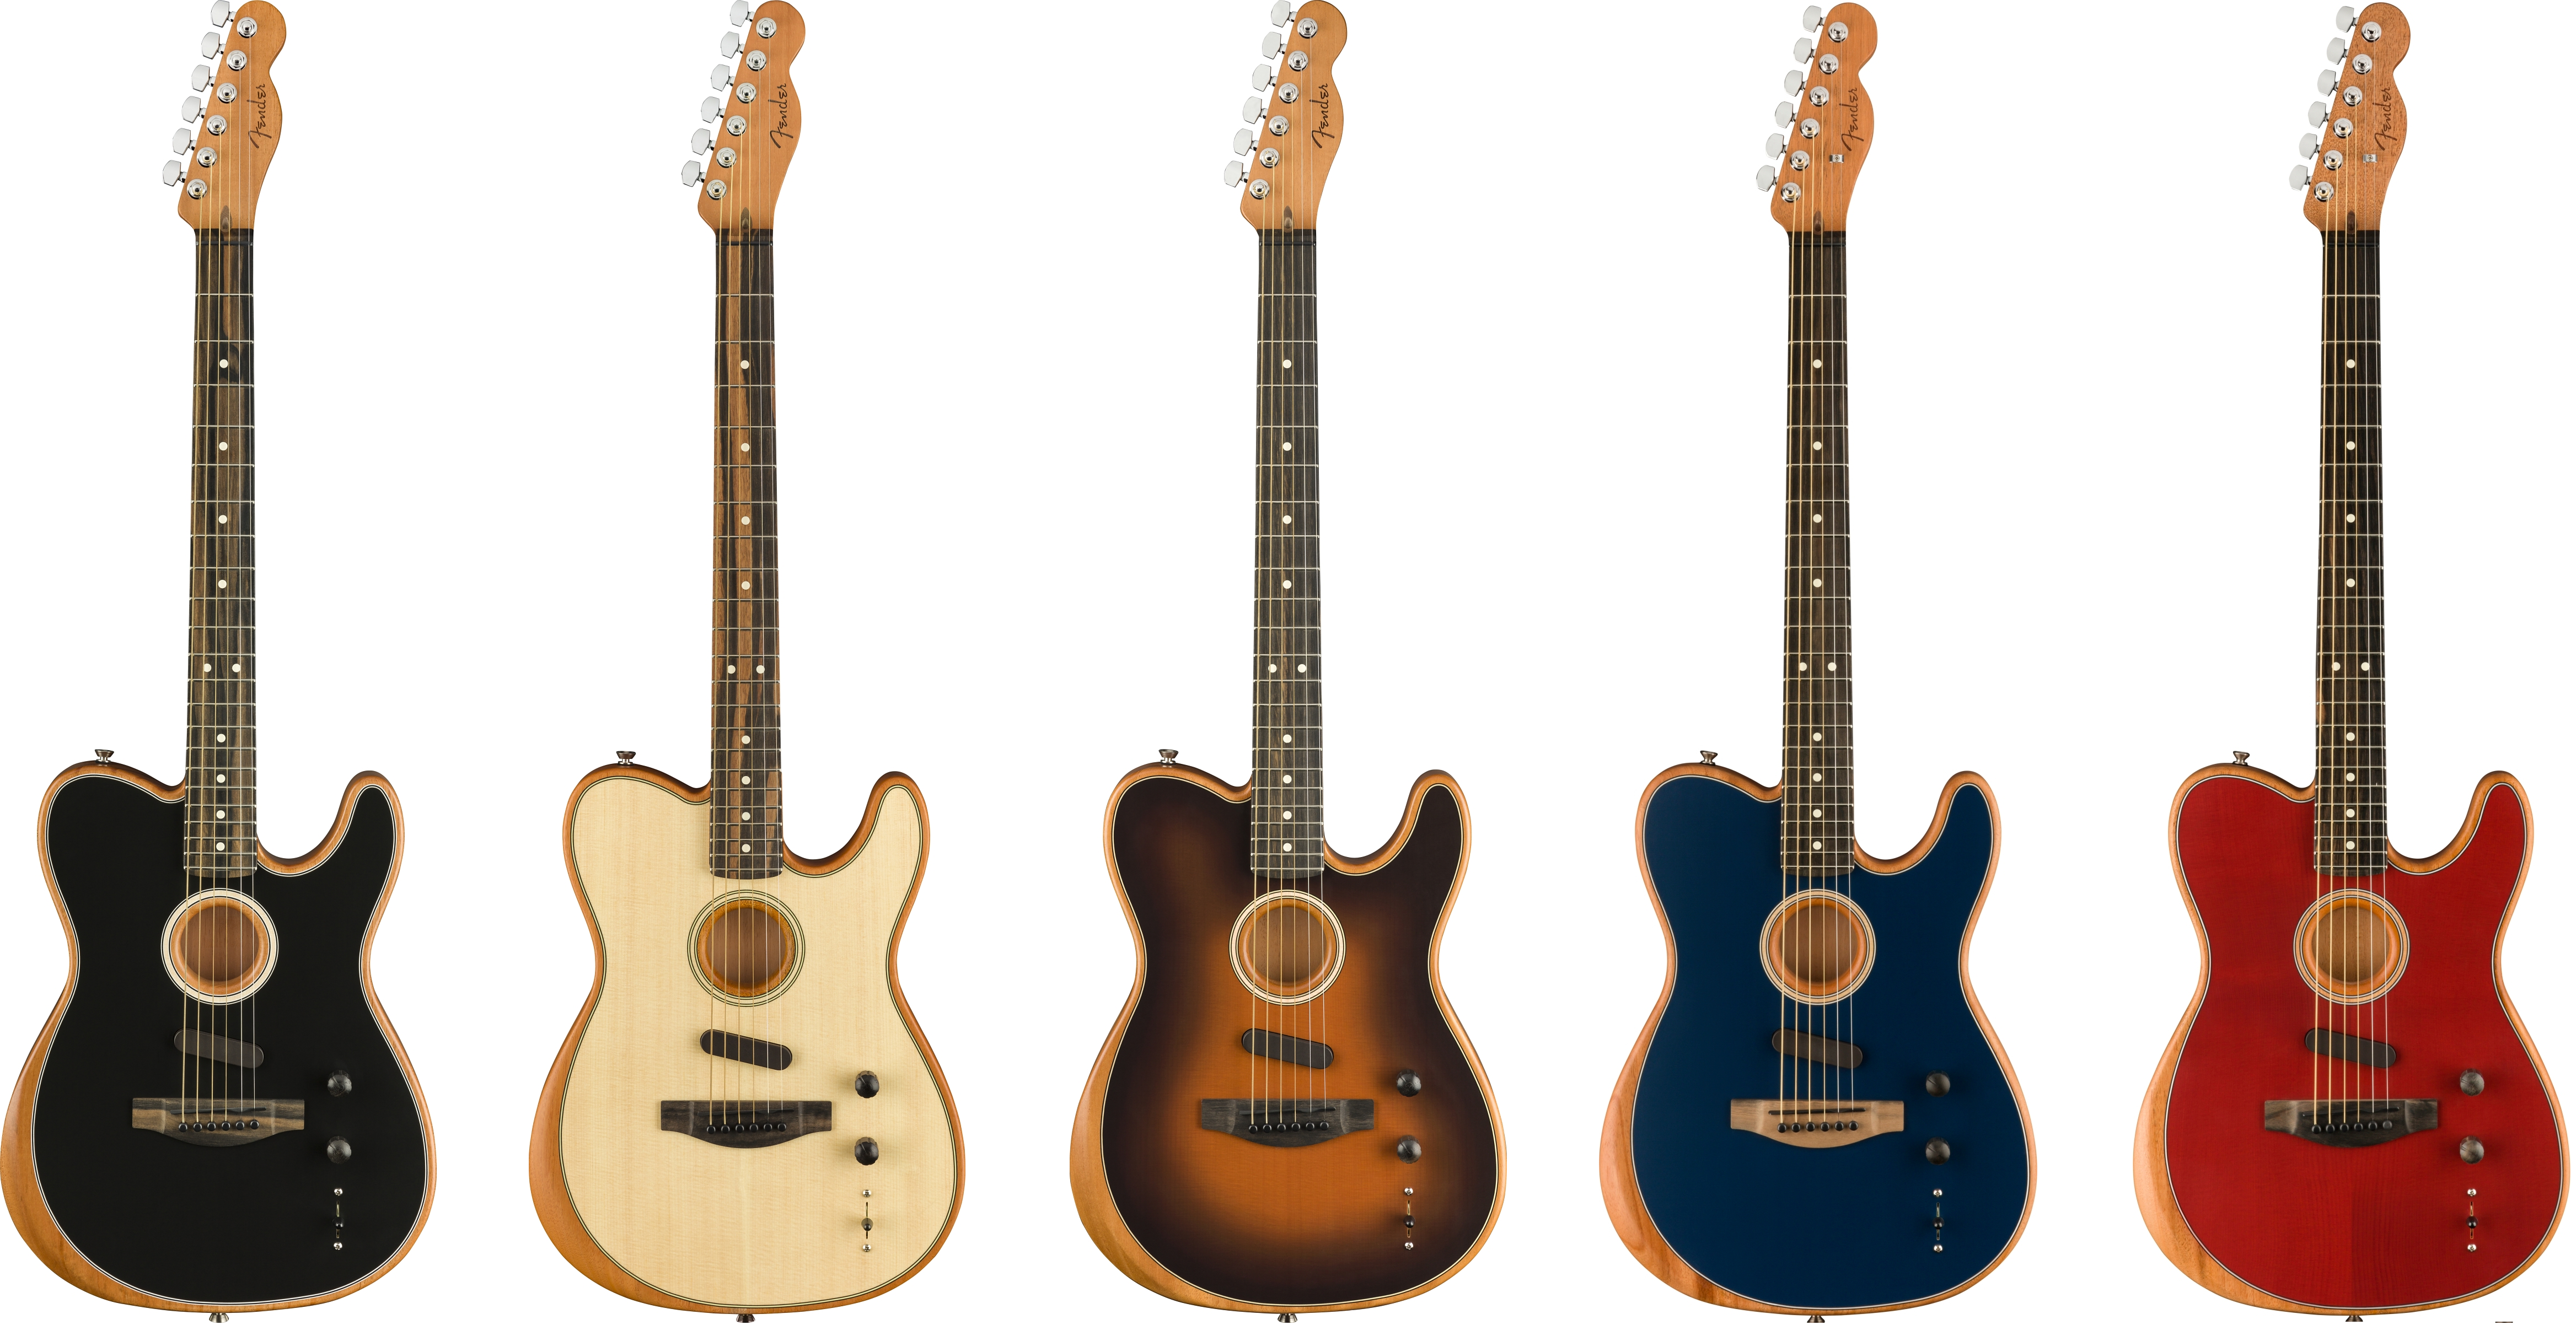 Fender American Acoustasonic Telecaster colors available